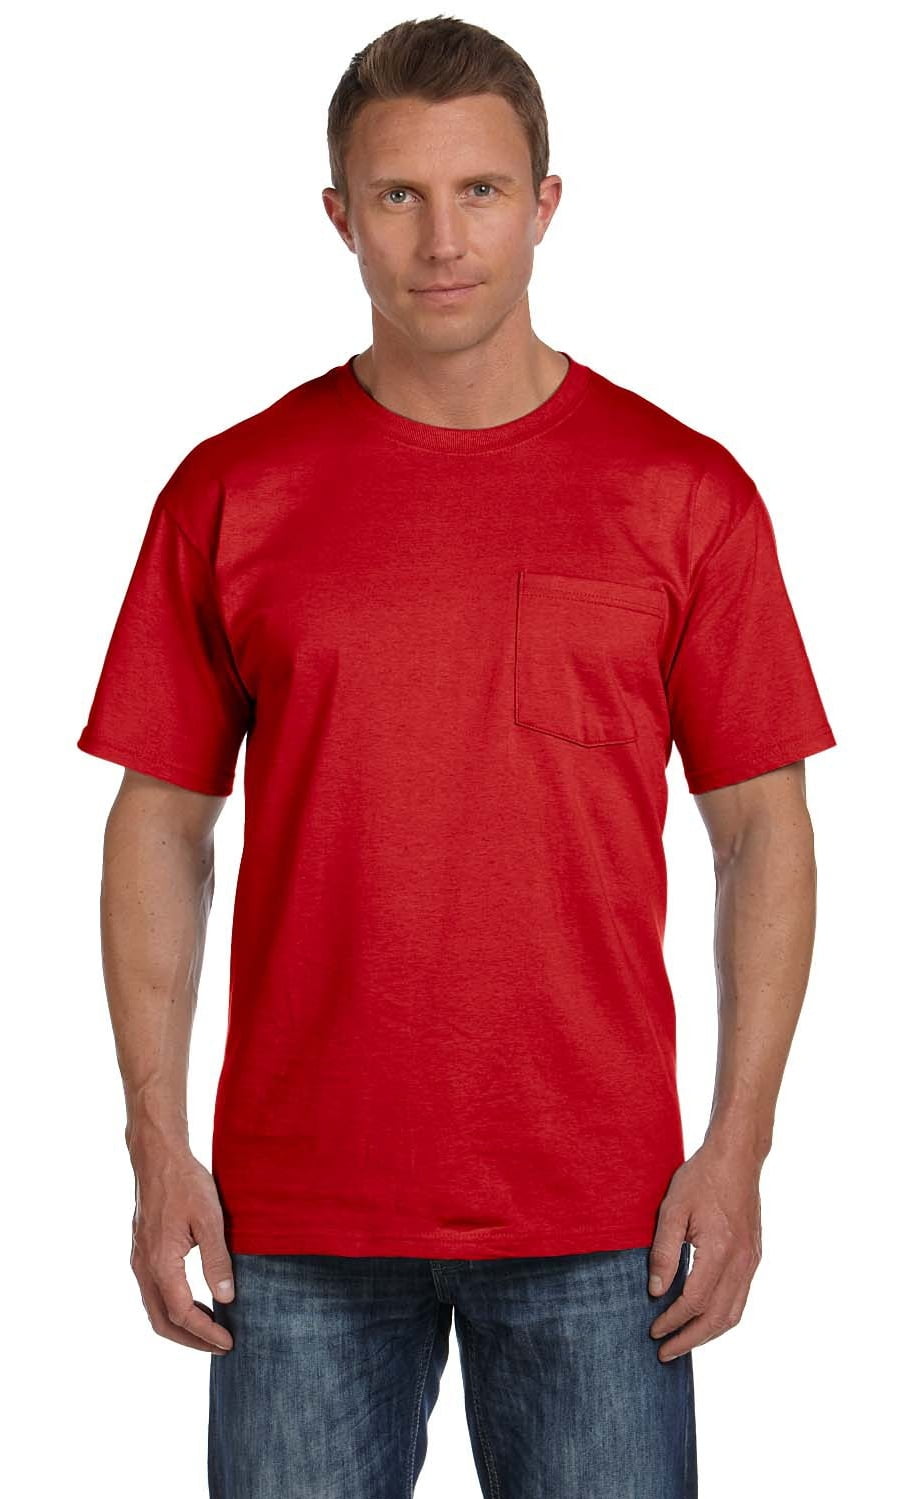 The Fruit of the Loom Adult 5 oz HD Cotton Pocket T-Shirt - TRUE RED ...